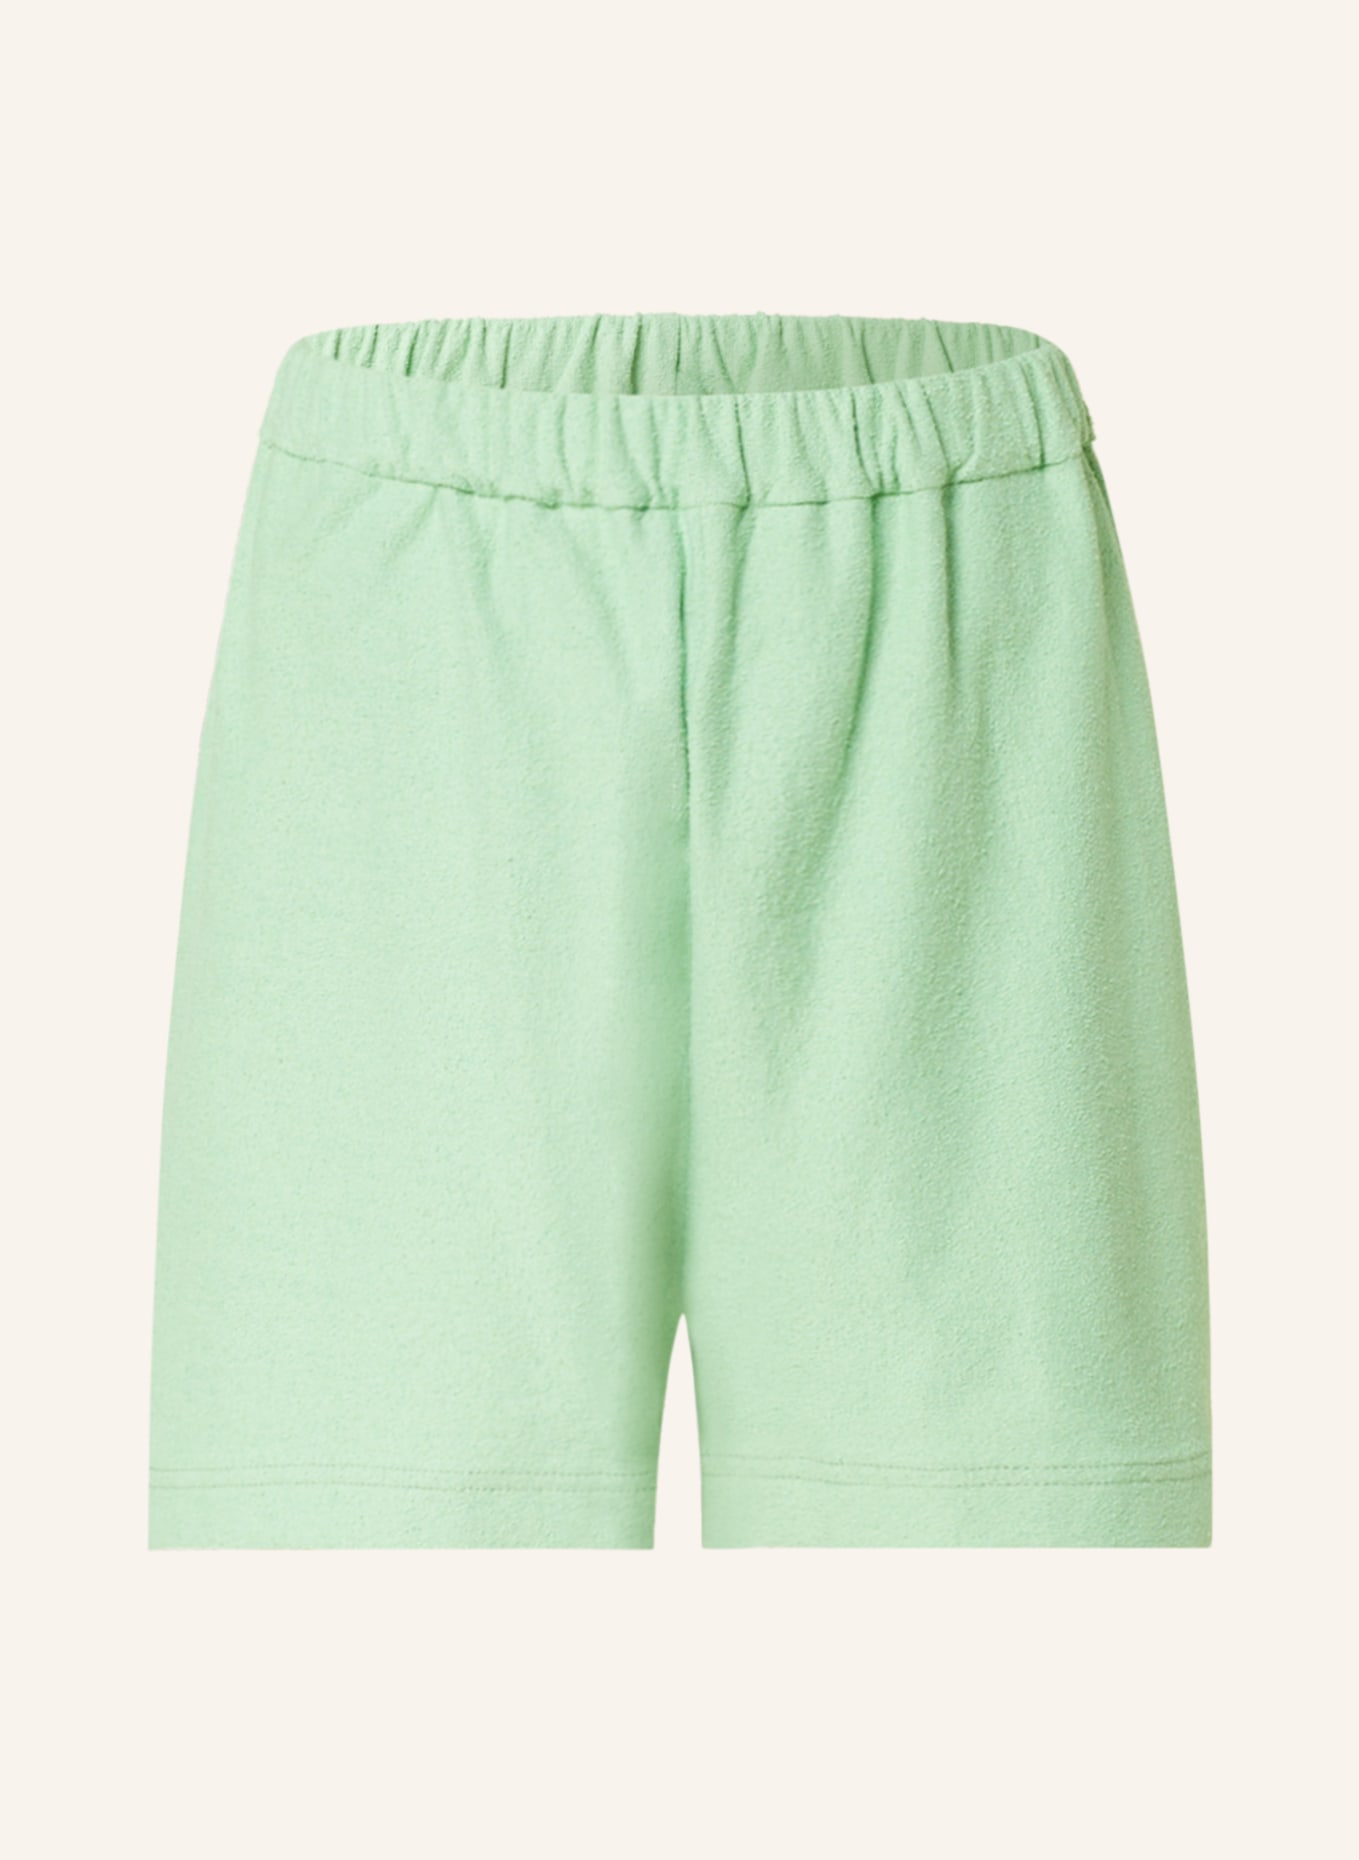 COS Terry cloth shorts, Color: MINT (Image 1)